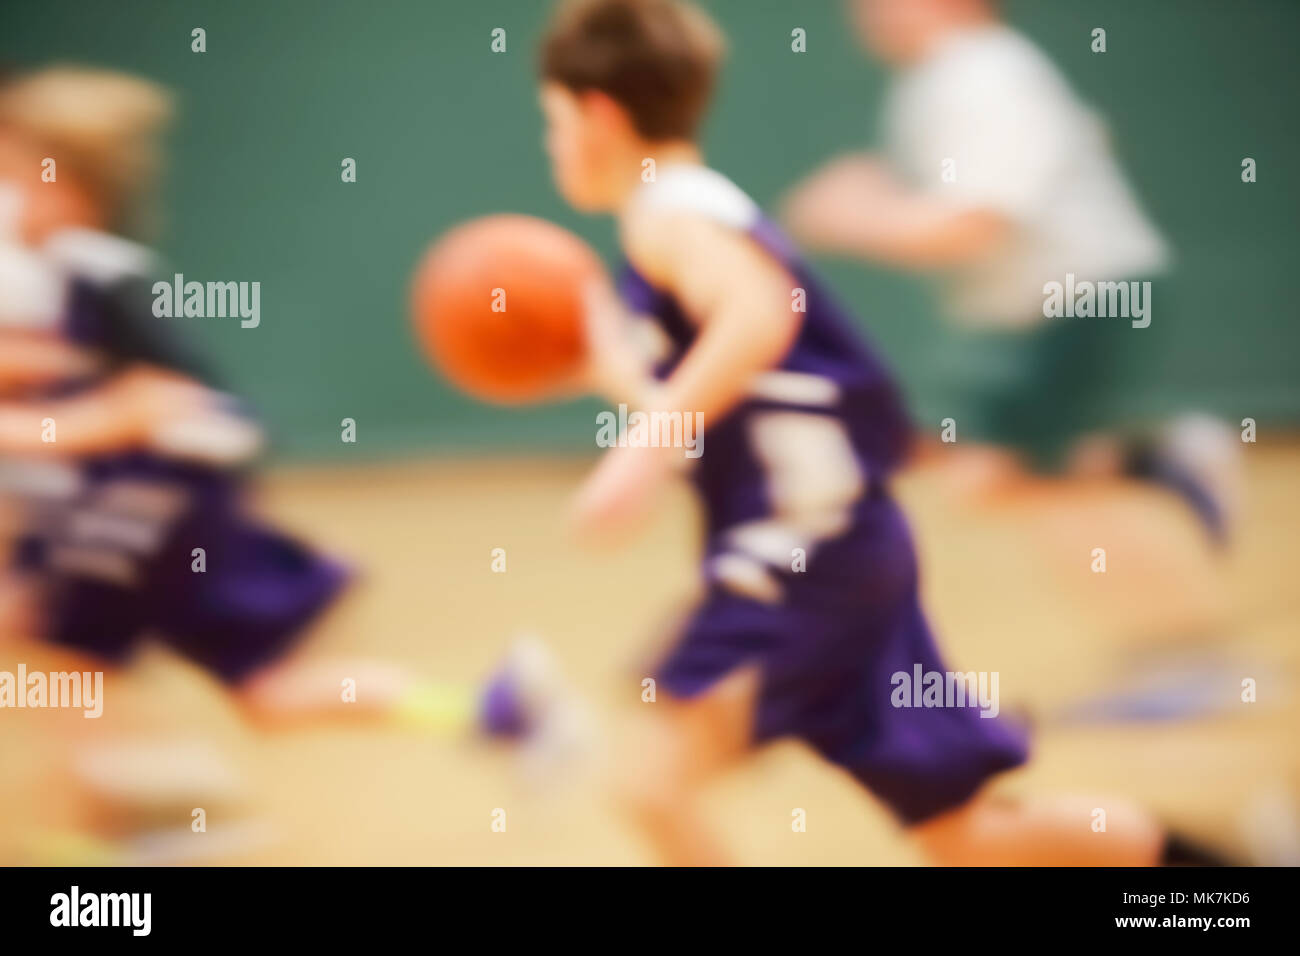 Motion blurred basketball game Stock Photo